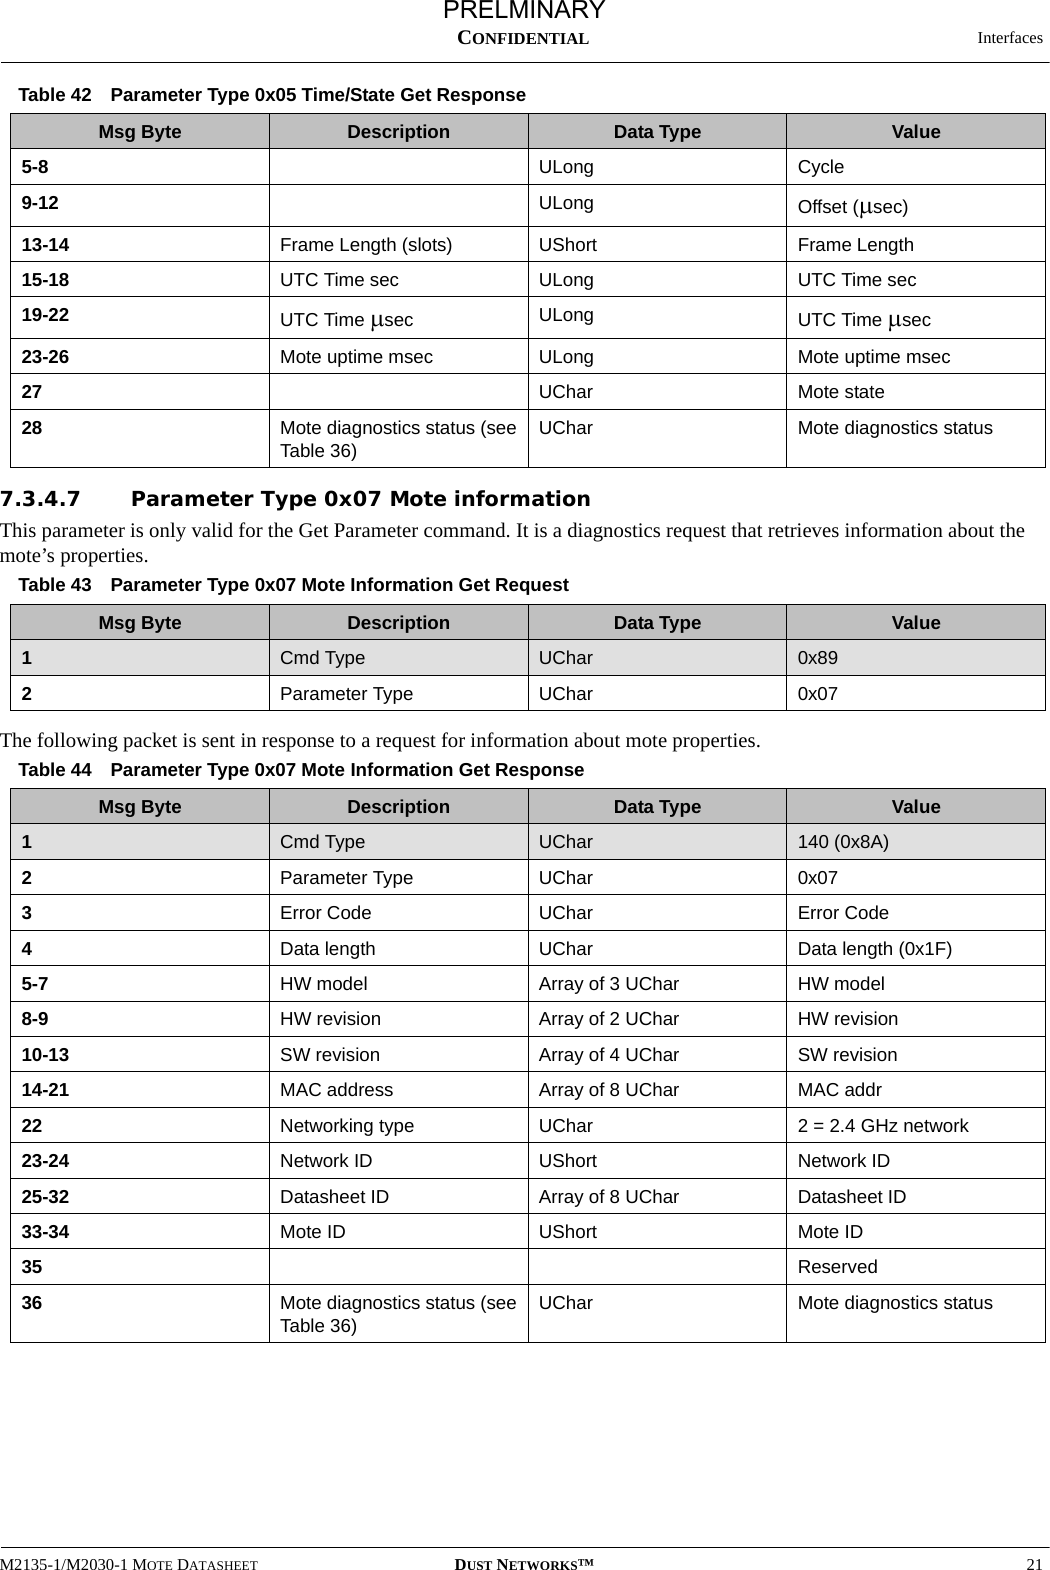   InterfacesM2135-1/M2030-1 MOTE DATASHEET DUST NETWORKS™21CONFIDENTIAL7.3.4.7 Parameter Type 0x07 Mote informationThis parameter is only valid for the Get Parameter command. It is a diagnostics request that retrieves information about the mote’s properties.The following packet is sent in response to a request for information about mote properties.5-8 ULong Cycle9-12 ULong Offset (µsec)13-14 Frame Length (slots) UShort Frame Length15-18 UTC Time sec ULong UTC Time sec 19-22 UTC Time µsec ULong UTC Time µsec 23-26 Mote uptime msec ULong Mote uptime msec 27 UChar Mote state28 Mote diagnostics status (see Table 36)UChar Mote diagnostics statusTable 43 Parameter Type 0x07 Mote Information Get RequestMsg Byte Description Data Type Value1  Cmd Type UChar 0x892Parameter Type UChar 0x07Table 44 Parameter Type 0x07 Mote Information Get ResponseMsg Byte Description Data Type Value1  Cmd Type UChar 140 (0x8A)2Parameter Type UChar 0x073Error Code UChar Error Code 4Data length UChar Data length (0x1F)5-7 HW model Array of 3 UChar HW model 8-9 HW revision Array of 2 UChar HW revision10-13 SW revision Array of 4 UChar SW revision 14-21 MAC address Array of 8 UChar MAC addr 22 Networking type UChar 2 = 2.4 GHz network23-24 Network ID UShort Network ID 25-32 Datasheet ID Array of 8 UChar Datasheet ID 33-34 Mote ID UShort Mote ID35 Reserved36 Mote diagnostics status (see Table 36)UChar Mote diagnostics statusTable 42  Parameter Type 0x05 Time/State Get ResponseMsg Byte Description Data Type ValuePRELMINARY